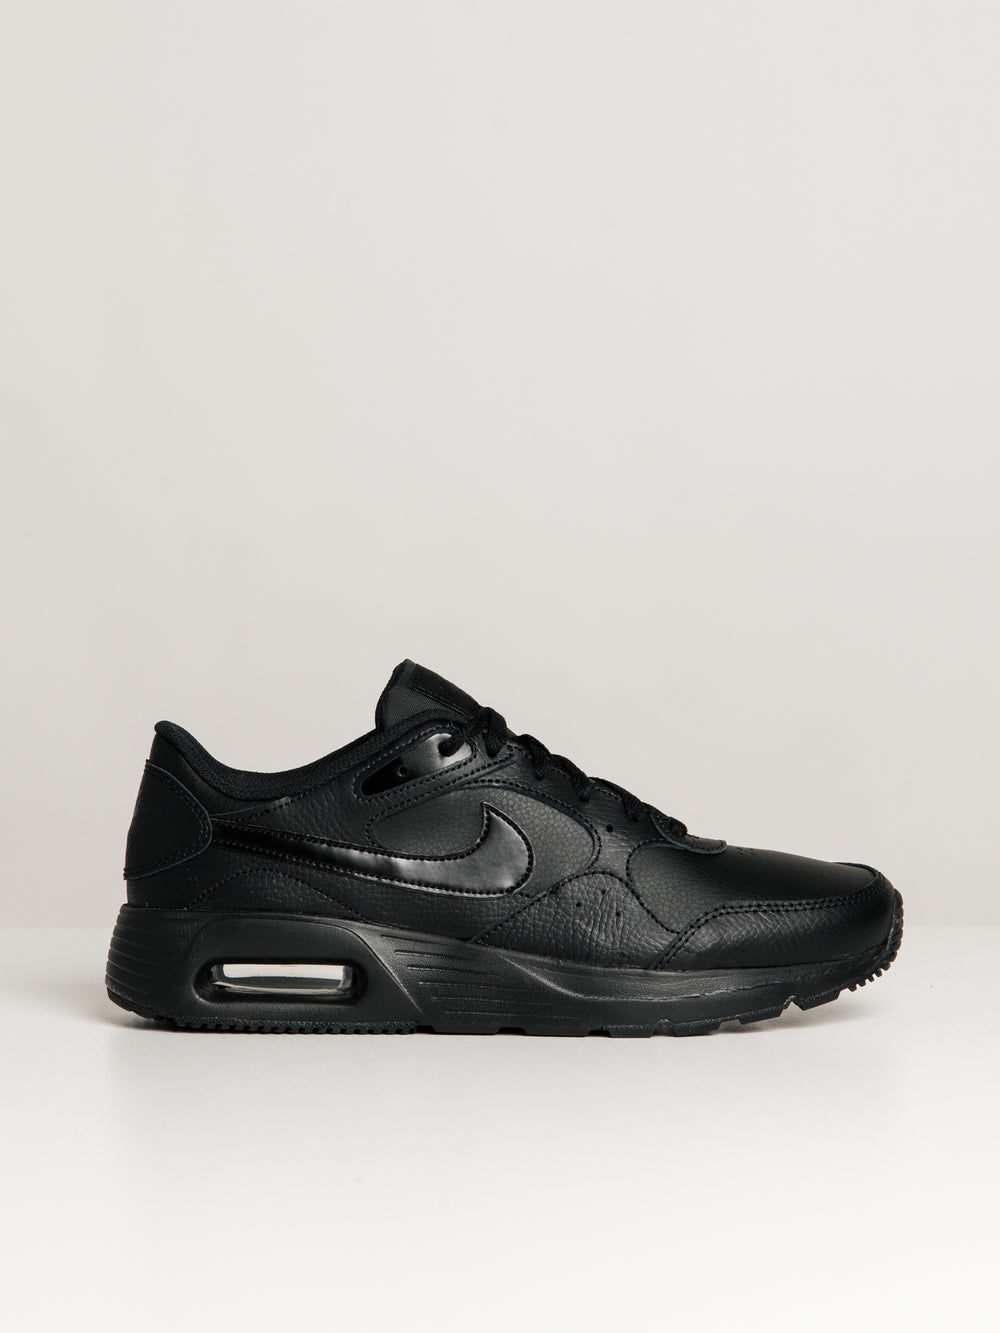 MENS NIKE AIR MAX SC LEATHER SNEAKER - CLEARANCE